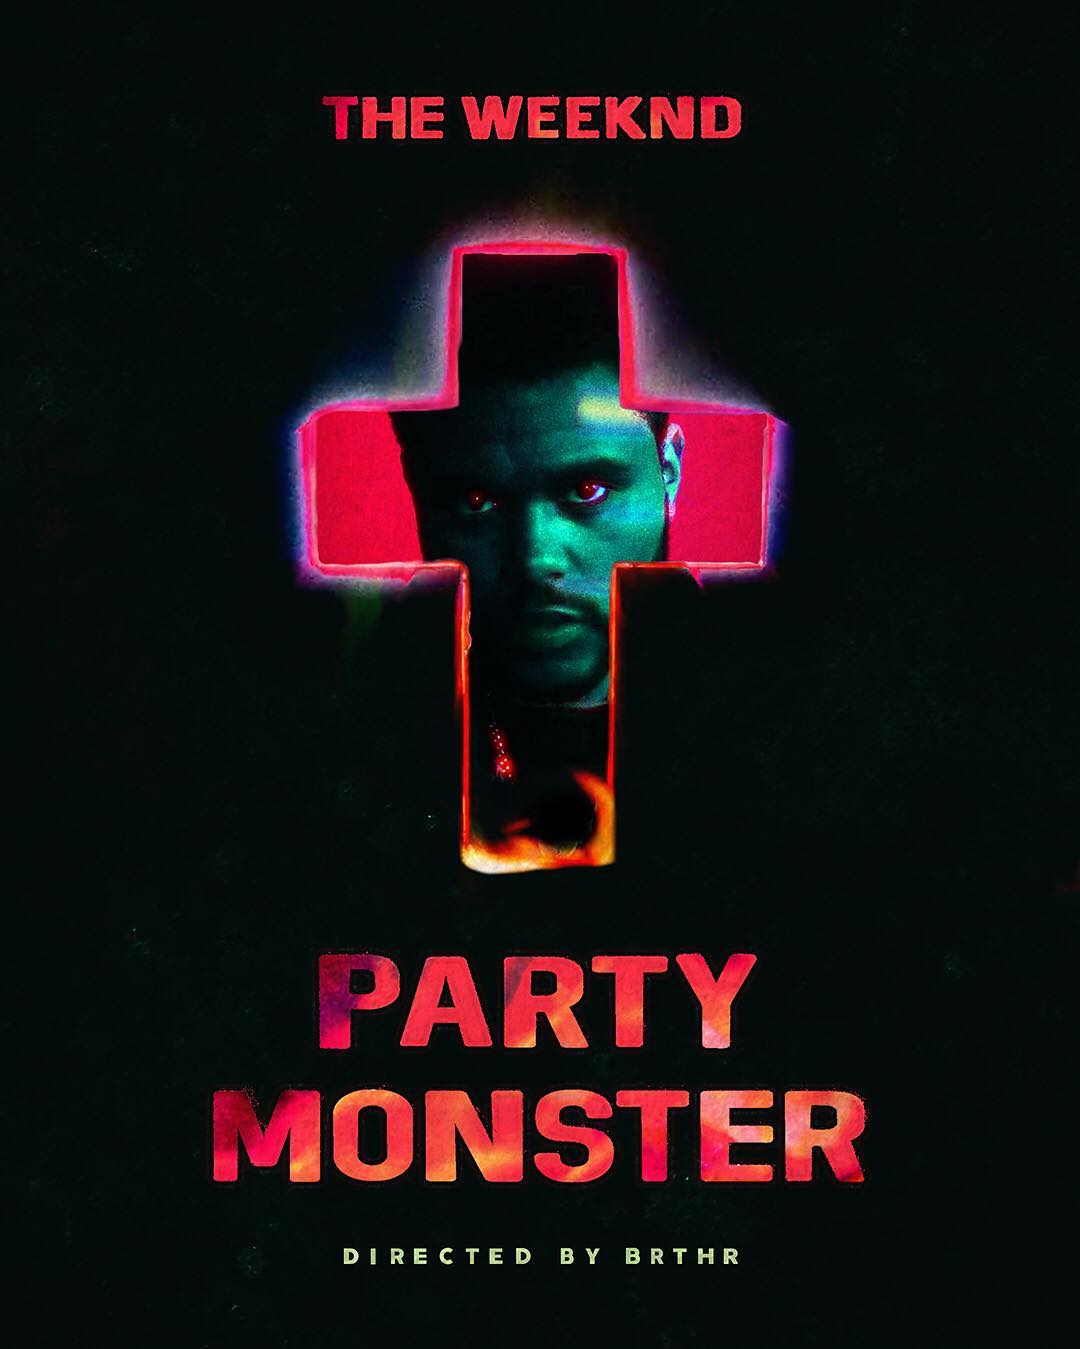 The Weeknd image party monster poster HD wallpaper